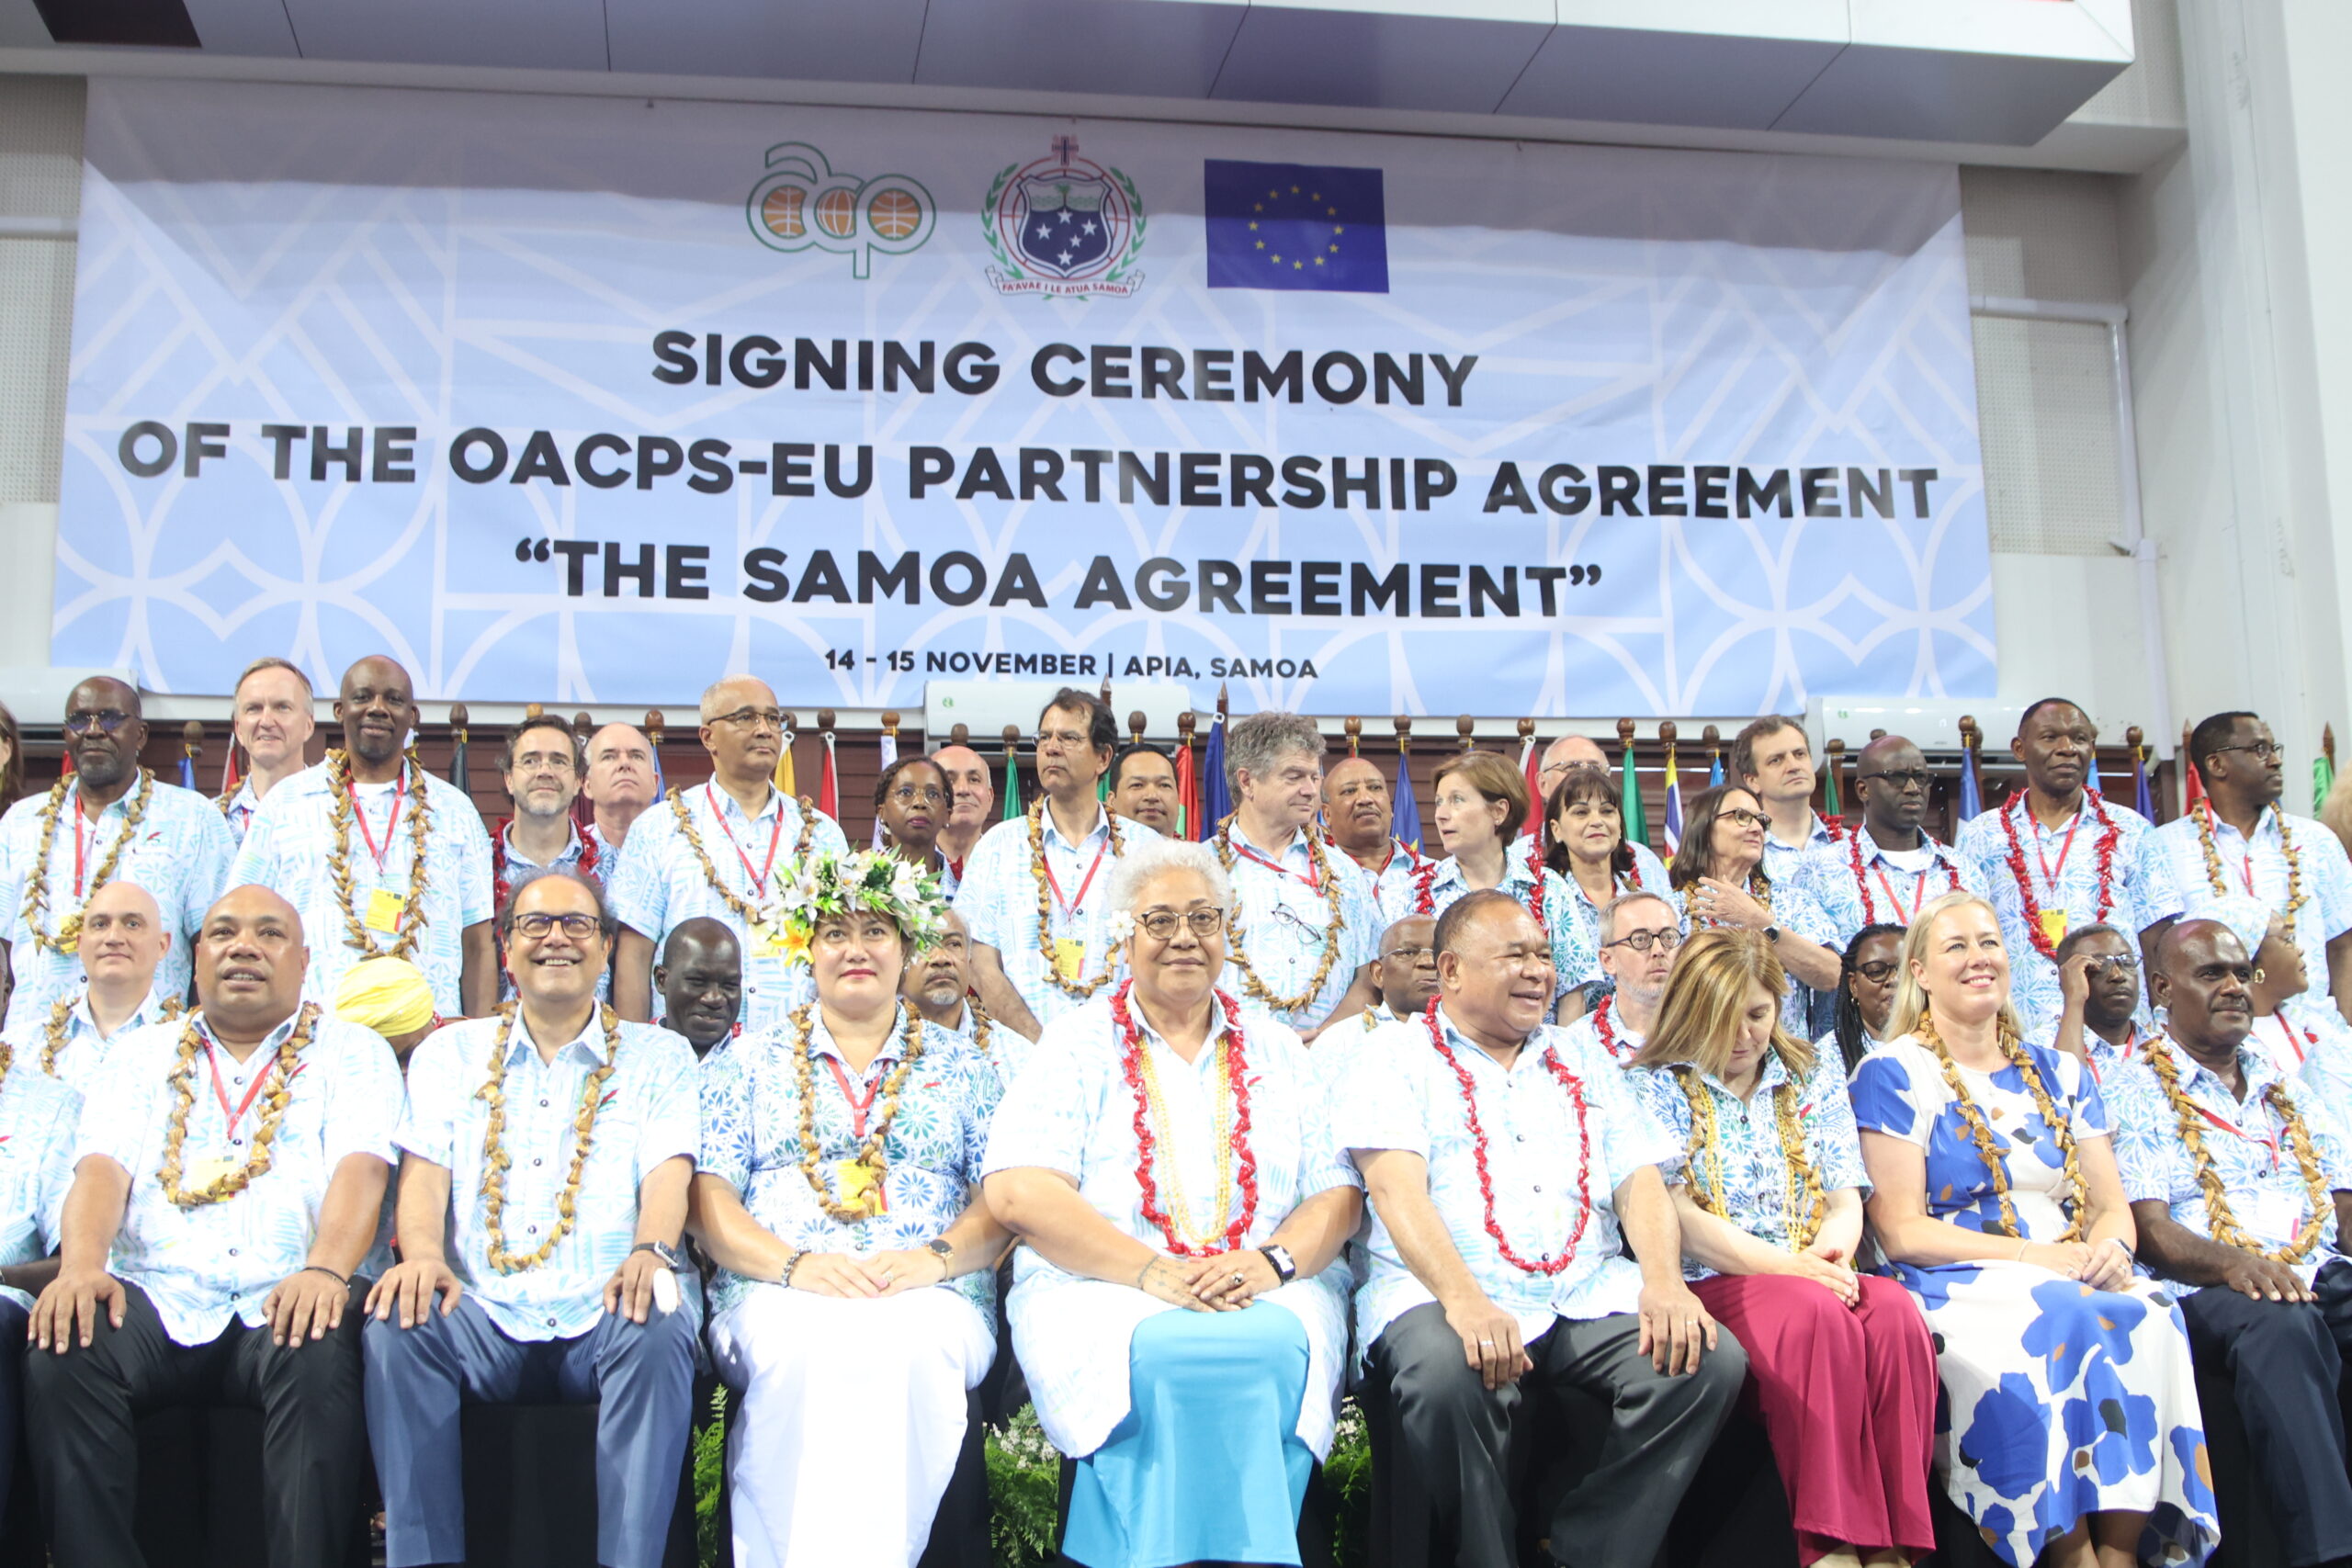 The Samoa Agreement is now a reality – the Organisation of African, Caribbean and Pacific States (OACPS) and European Union (EU) sign a new partnership agreement.